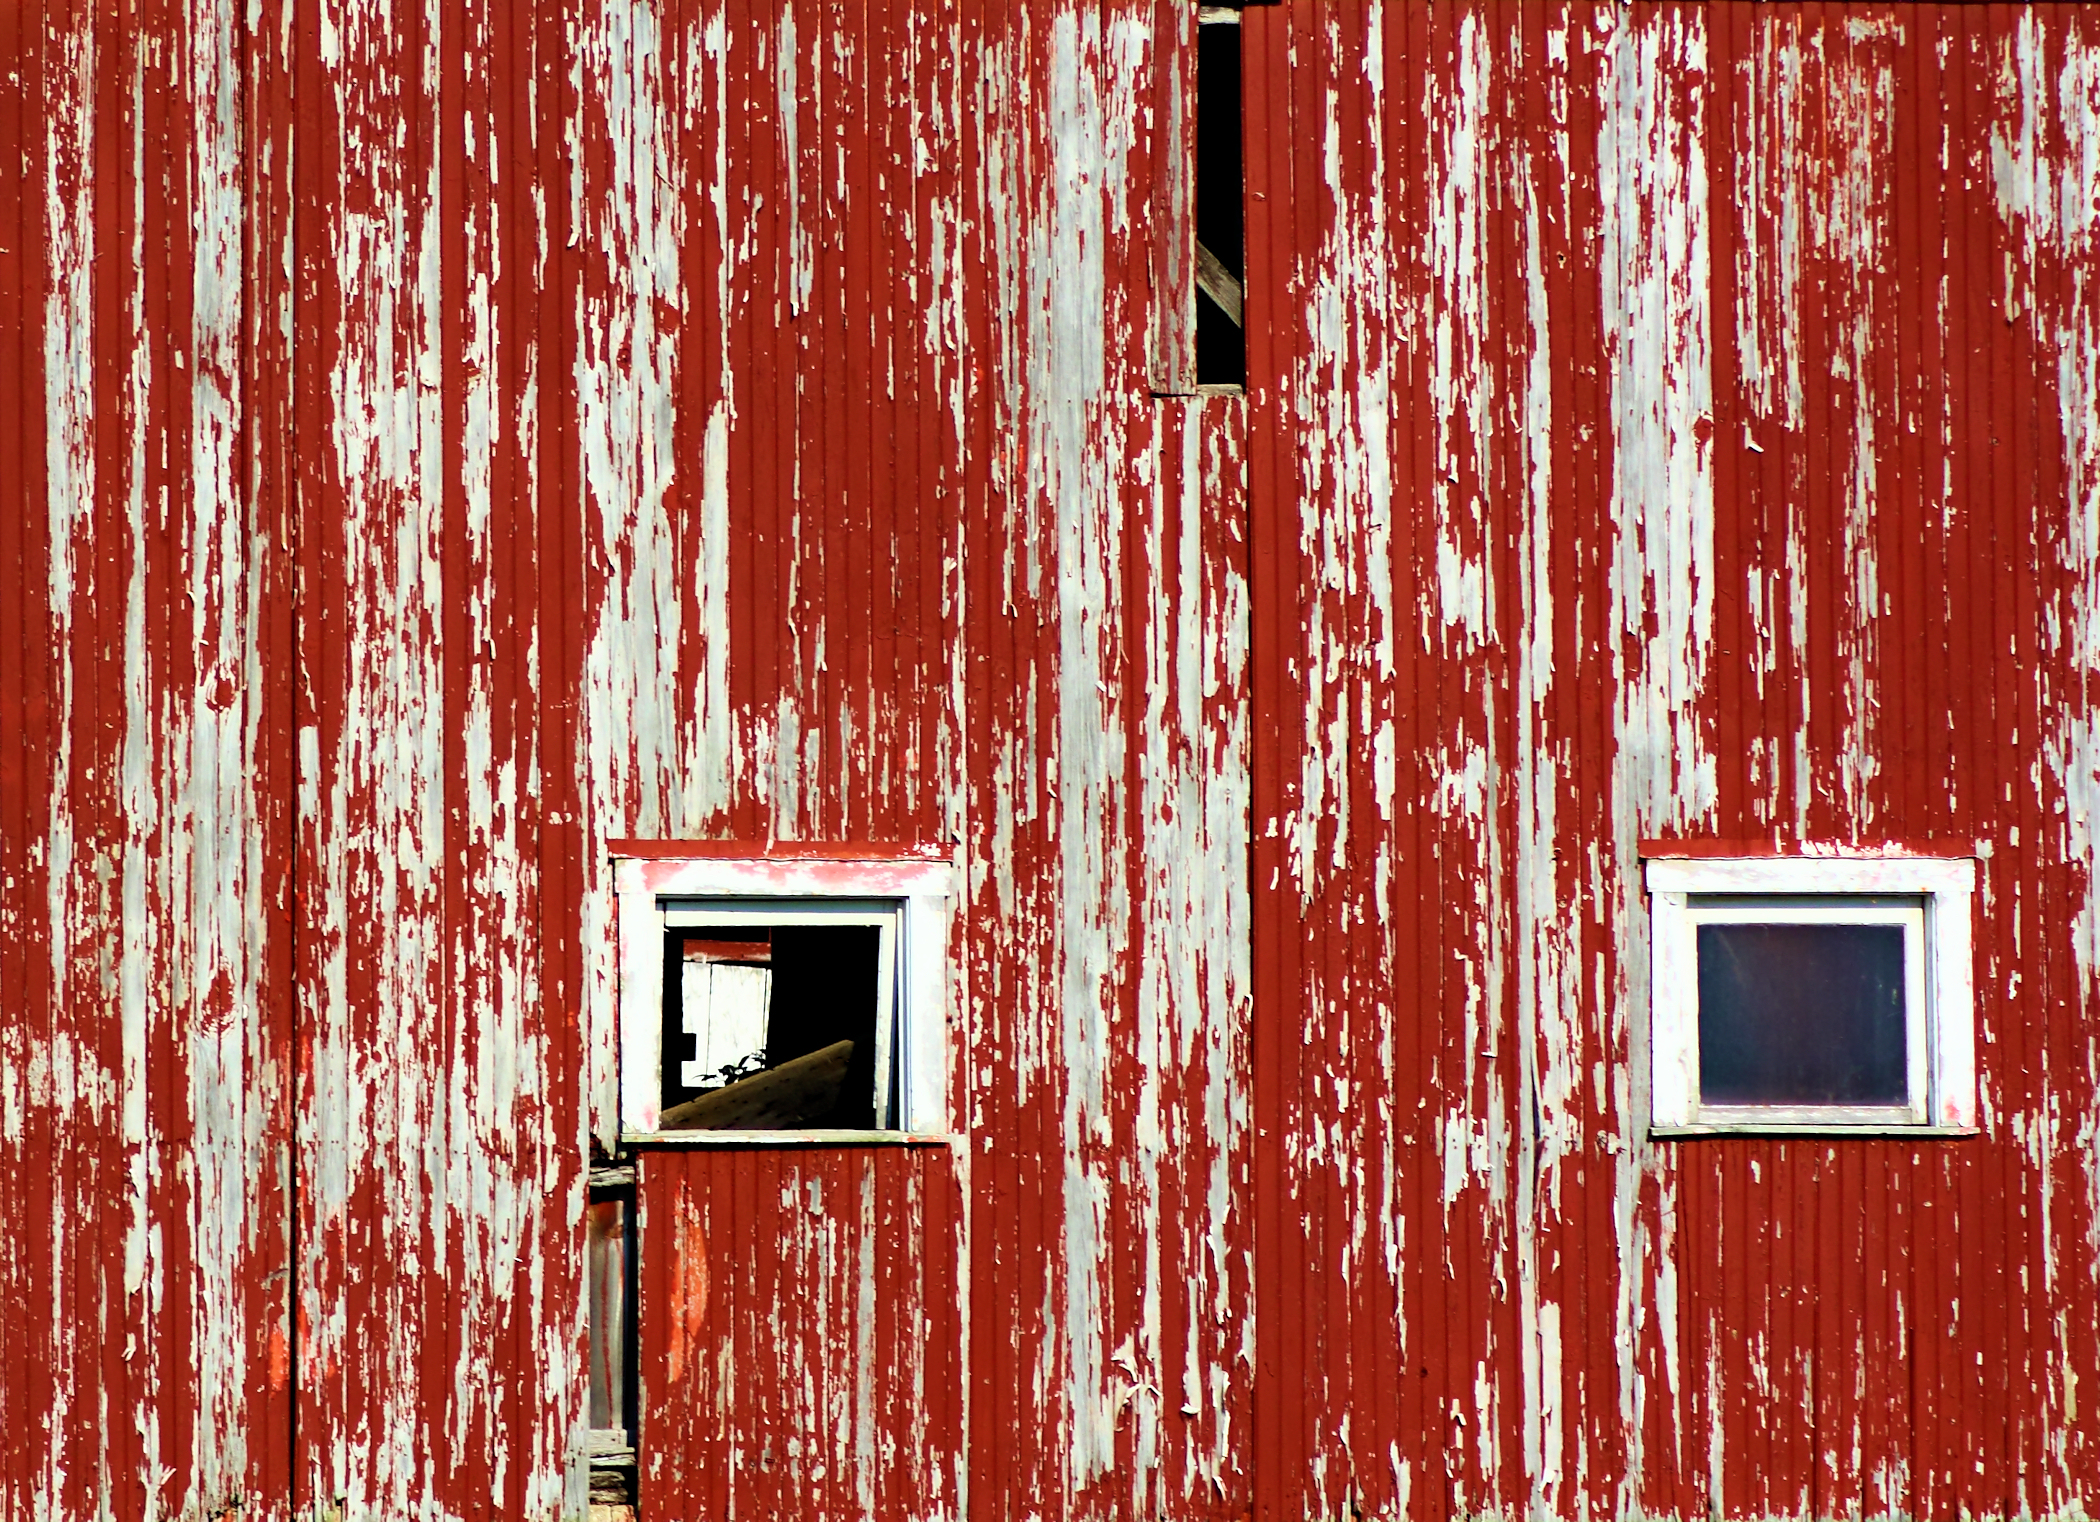 Old Red Barn Siding Background Needs Painting With Windows And Missing